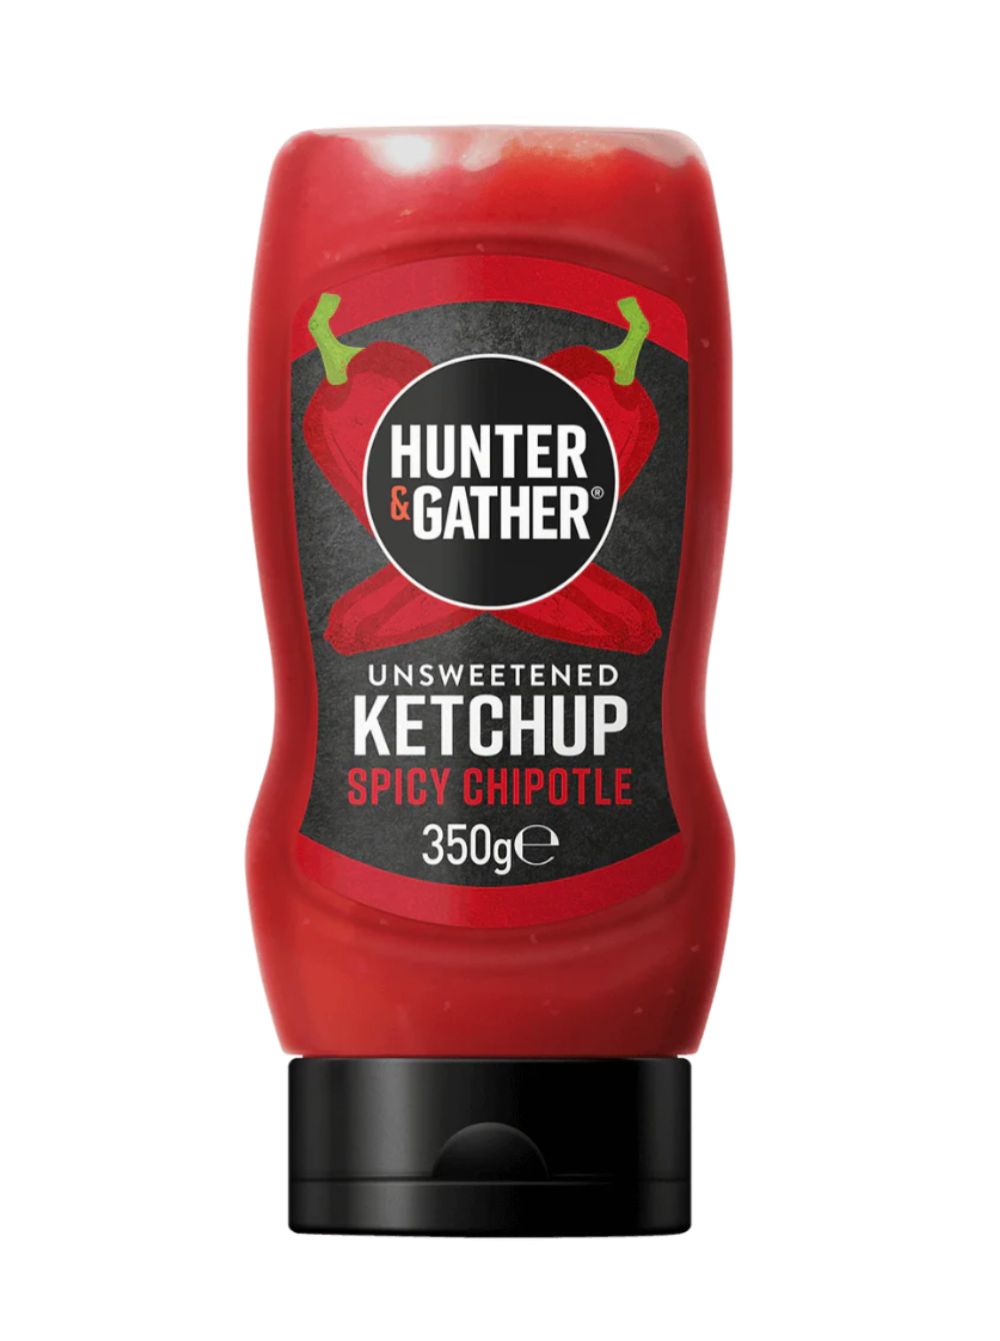 Spicy Chipotle Ketchup Sauce